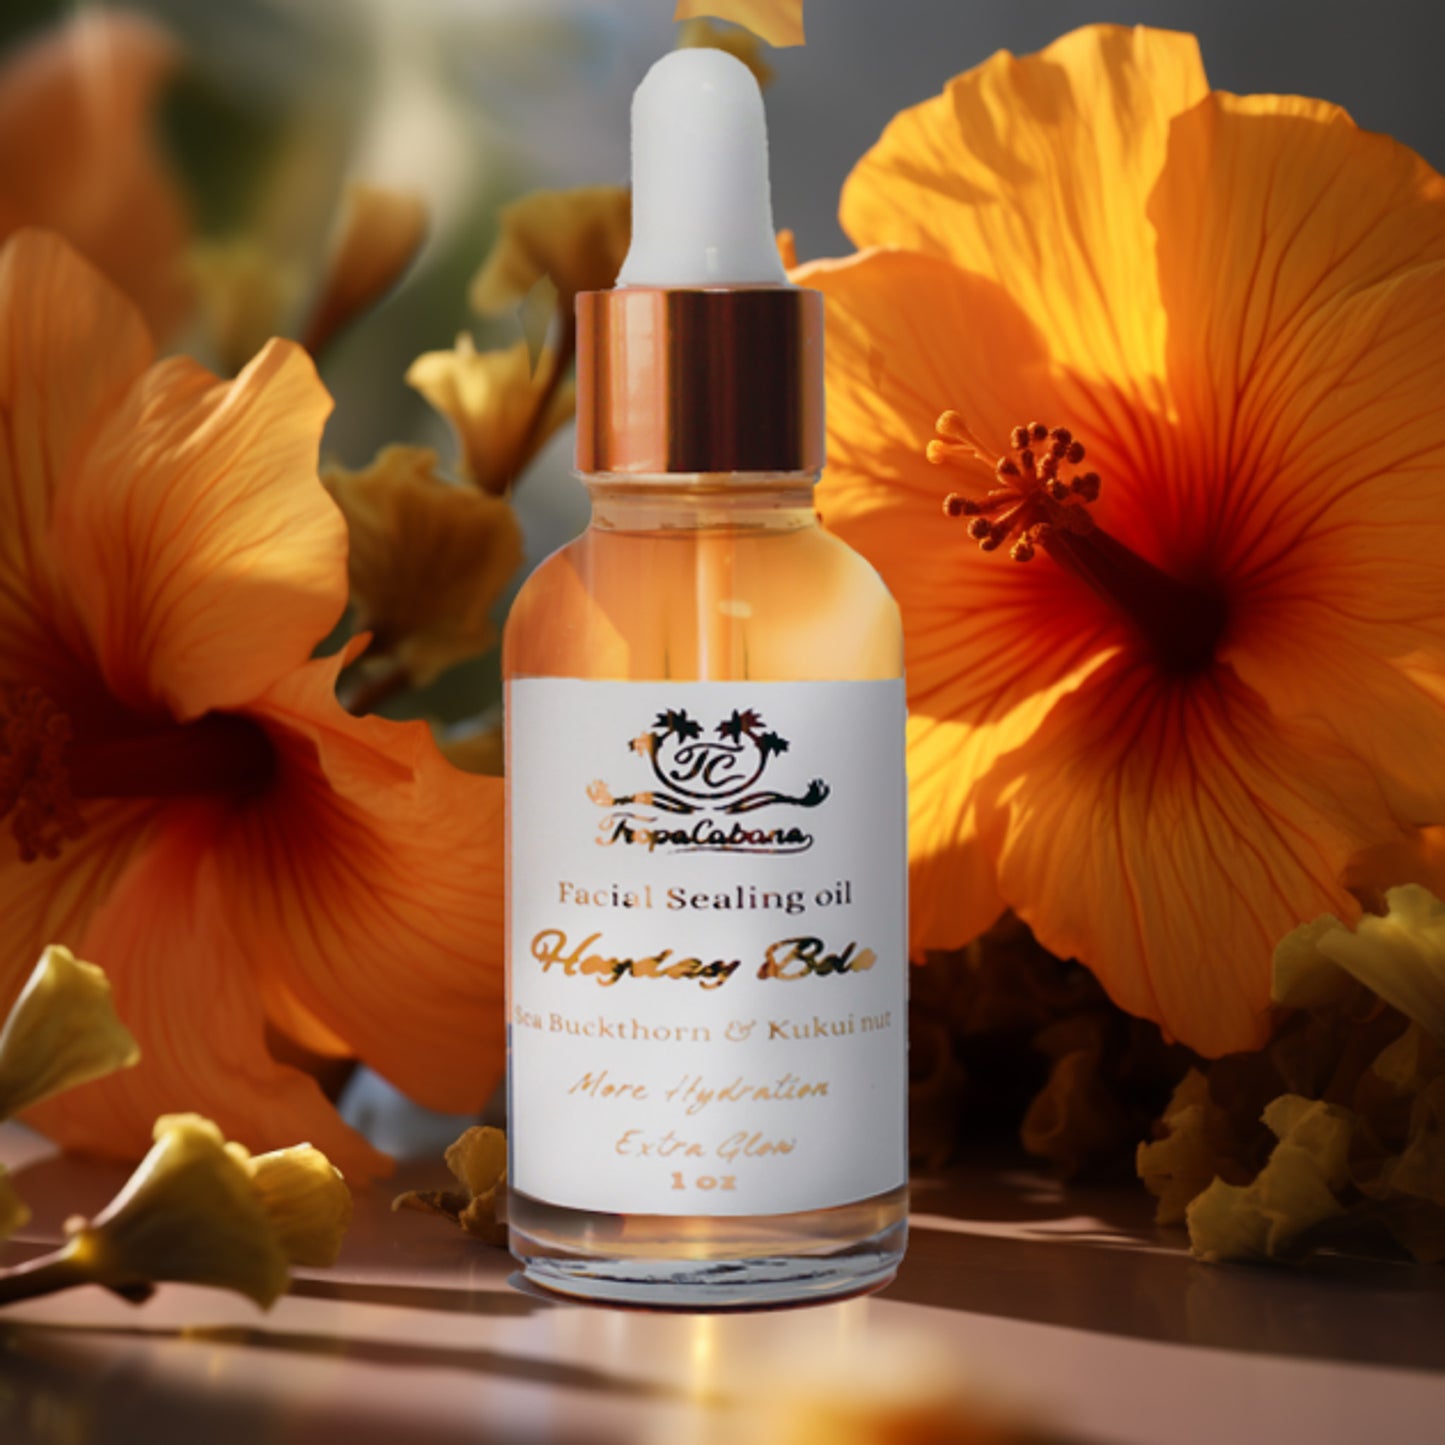 TropaCabana, Heyday Bela Facial Sealing Oil, Sea Buckthorn & Kukui Nut oil, Vegan Skincare, Natural Skincare, Not tested on animals, Daytime Skincare, Beauty Products, Spa Products